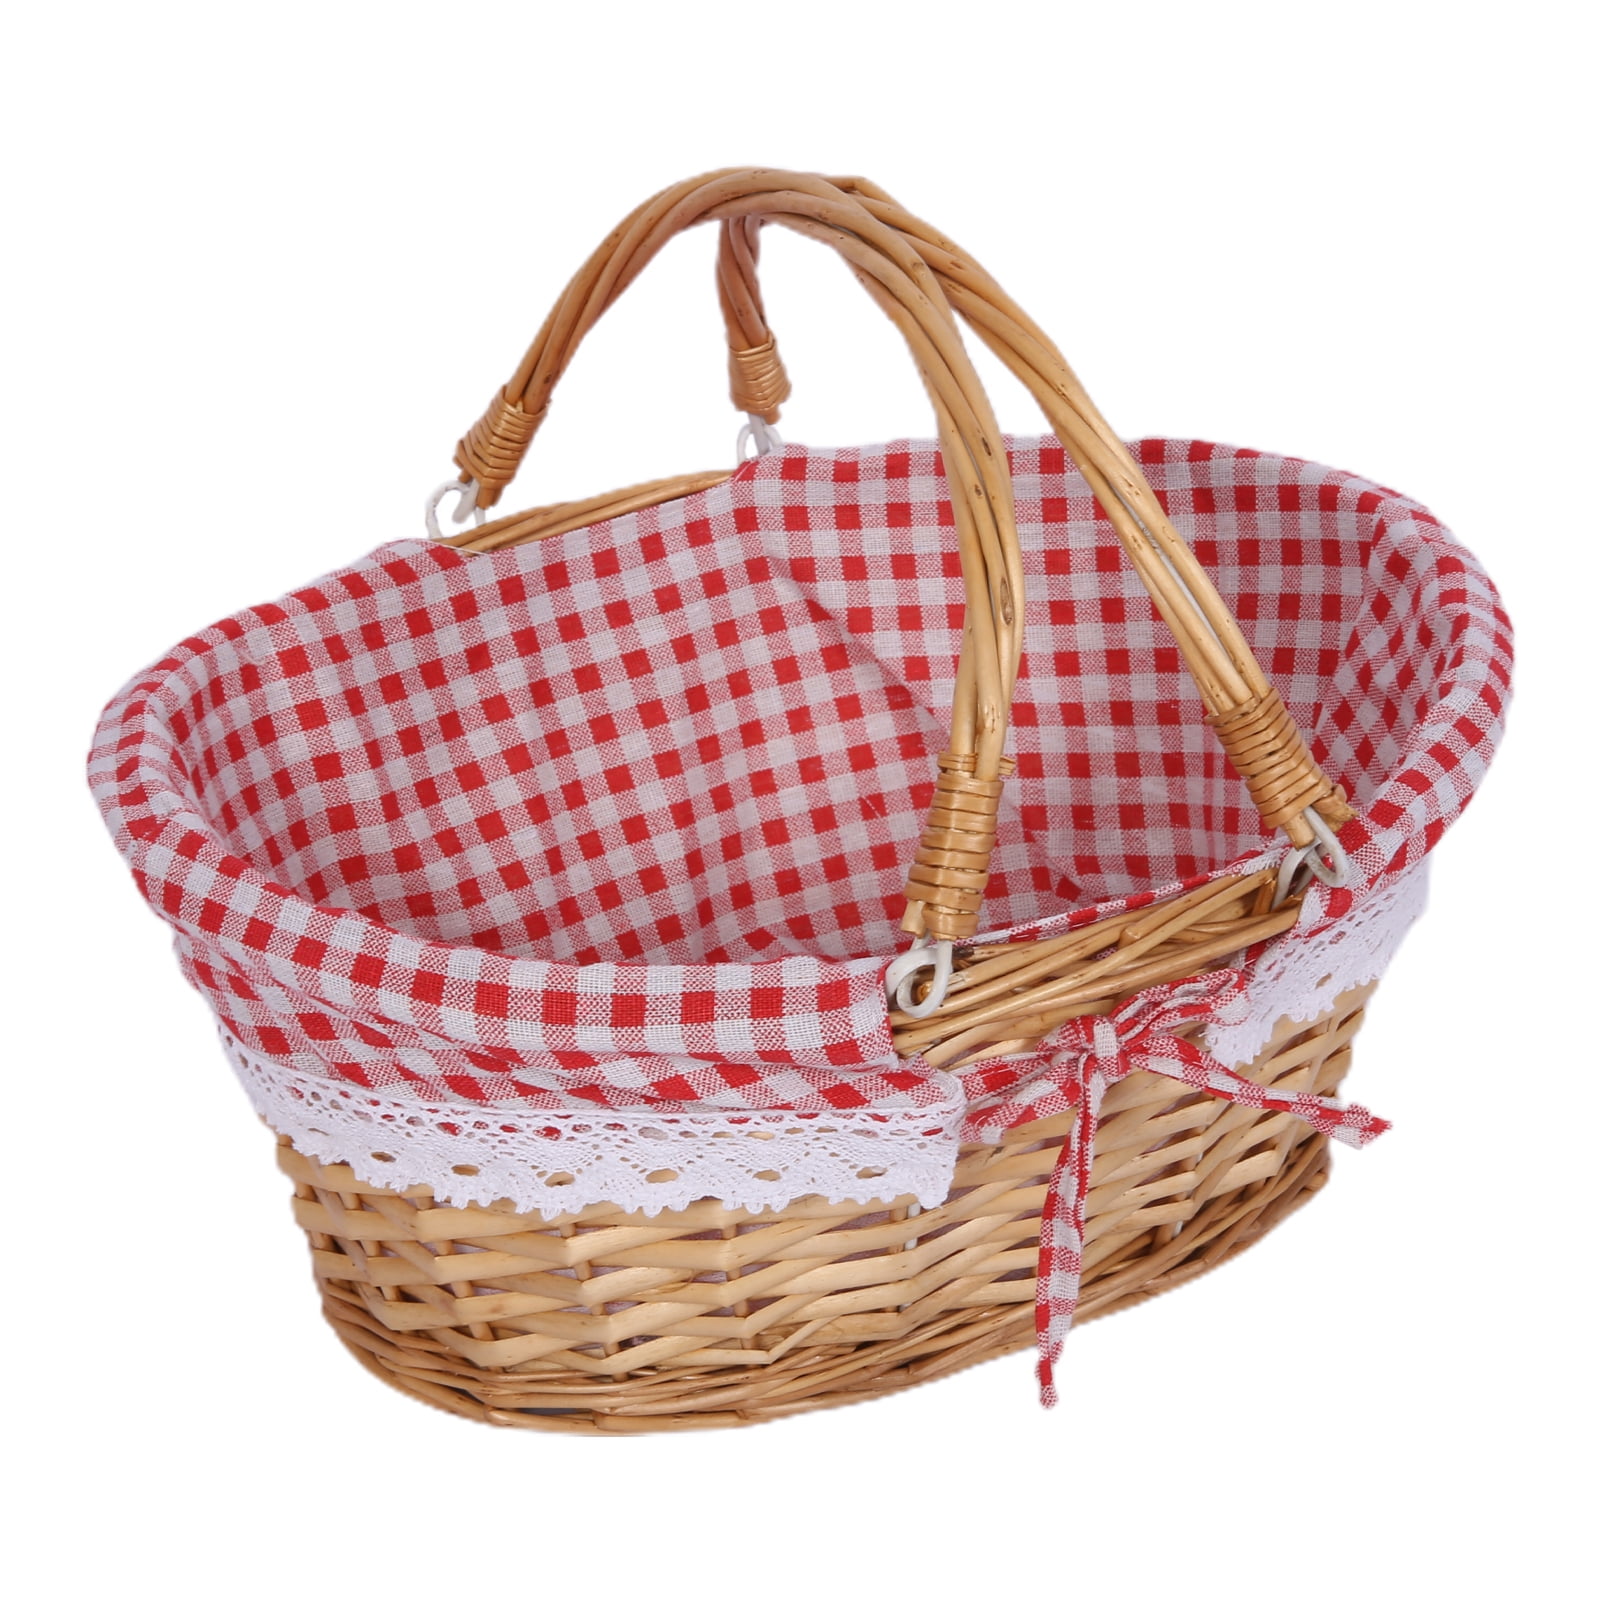 G GOOD GAIN Wicker Picnic Basket with Double Folding Handles,Willow Picnic Hamper,Natural Hand Woven Easter Basket,Easter Eggs and Candy Basket,Bath Toy and Kids Toy Storage,Gift Packing Basket.Red 